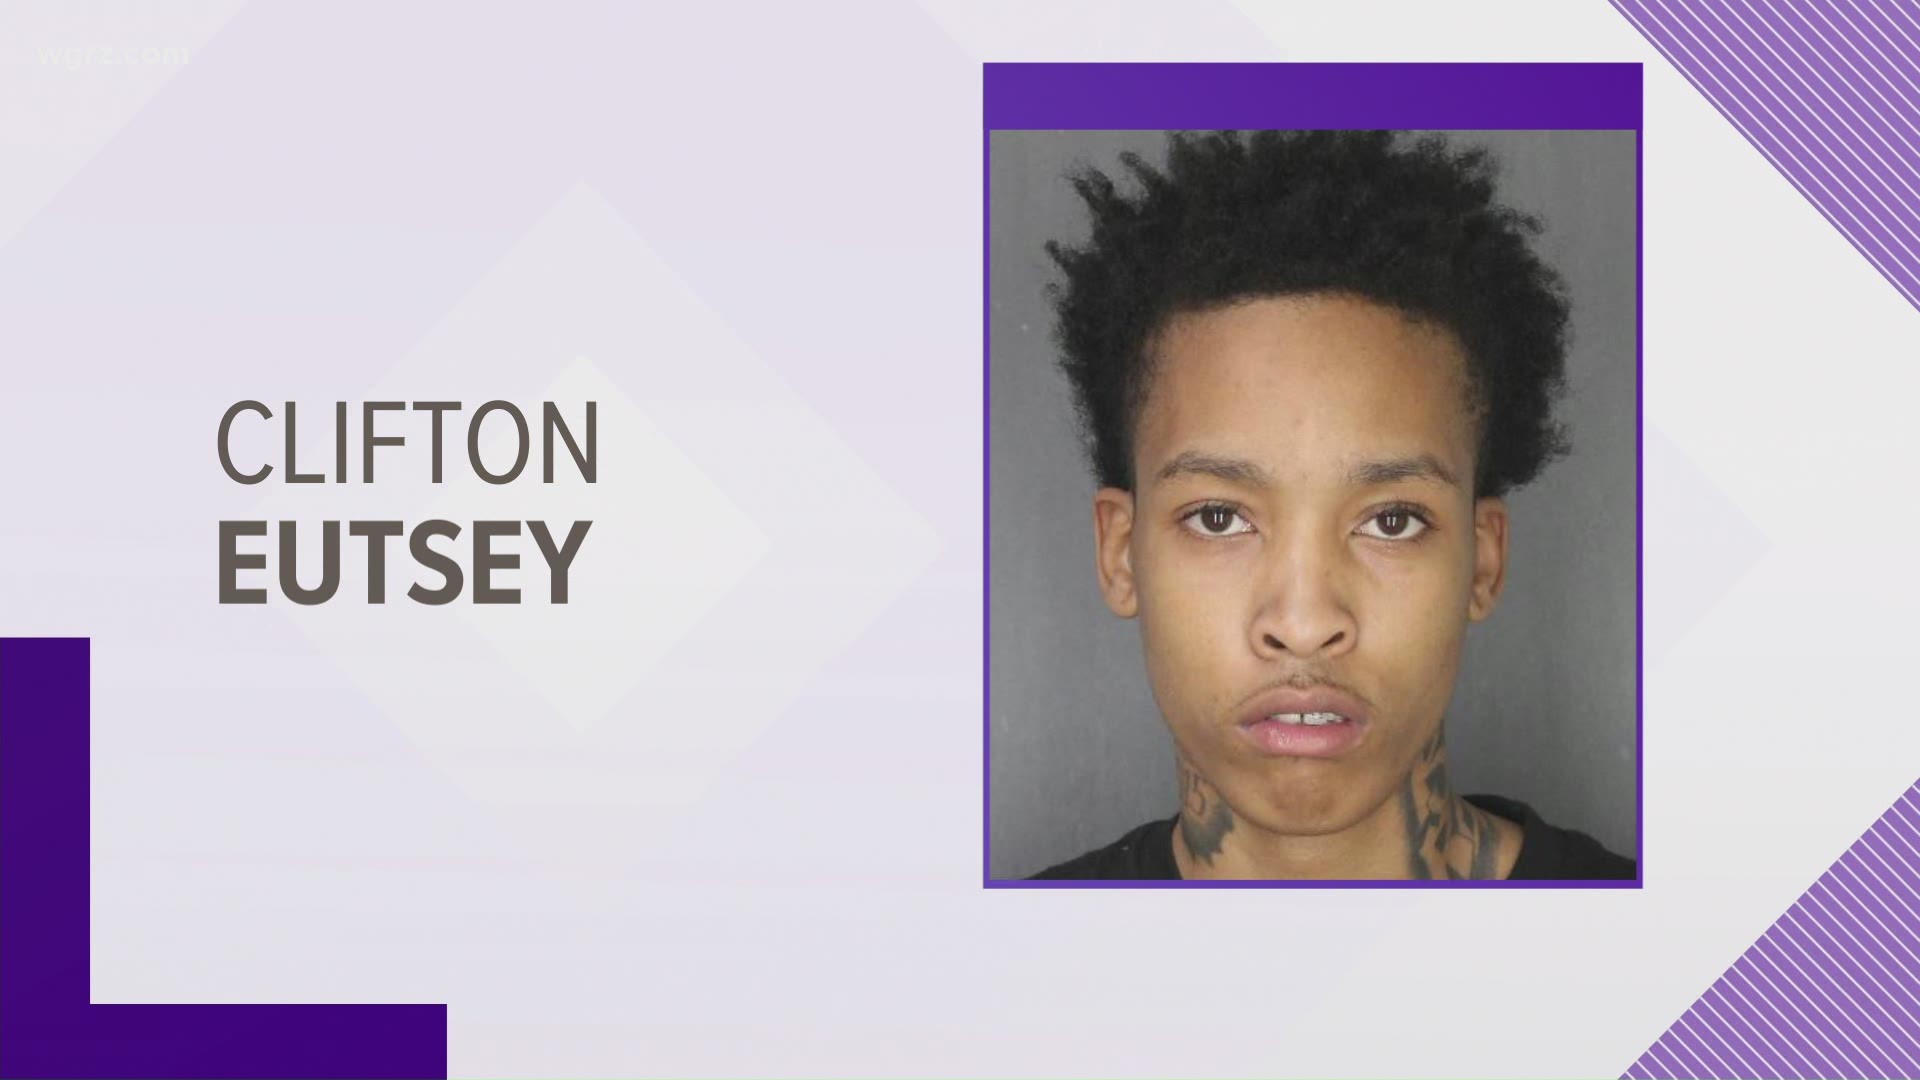 The DA's office has charged 18 year old Clifton Eutsey with felony insurance fraud and three misdemeanor charges.